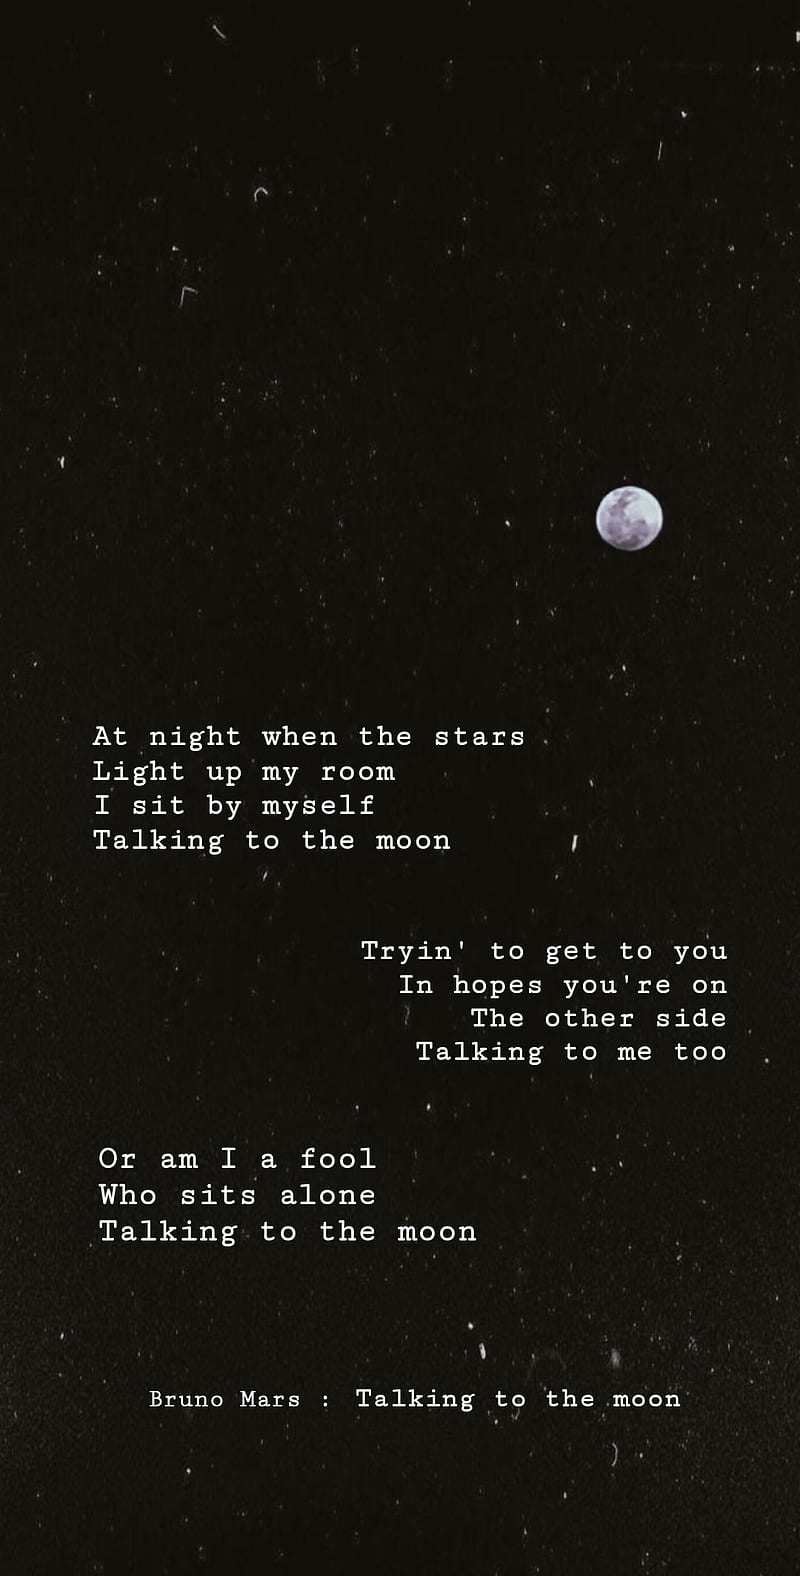 Talking to the moon, aesthetic, amoled, black, bruno mars, mars, quote, song, HD phone wallpaper